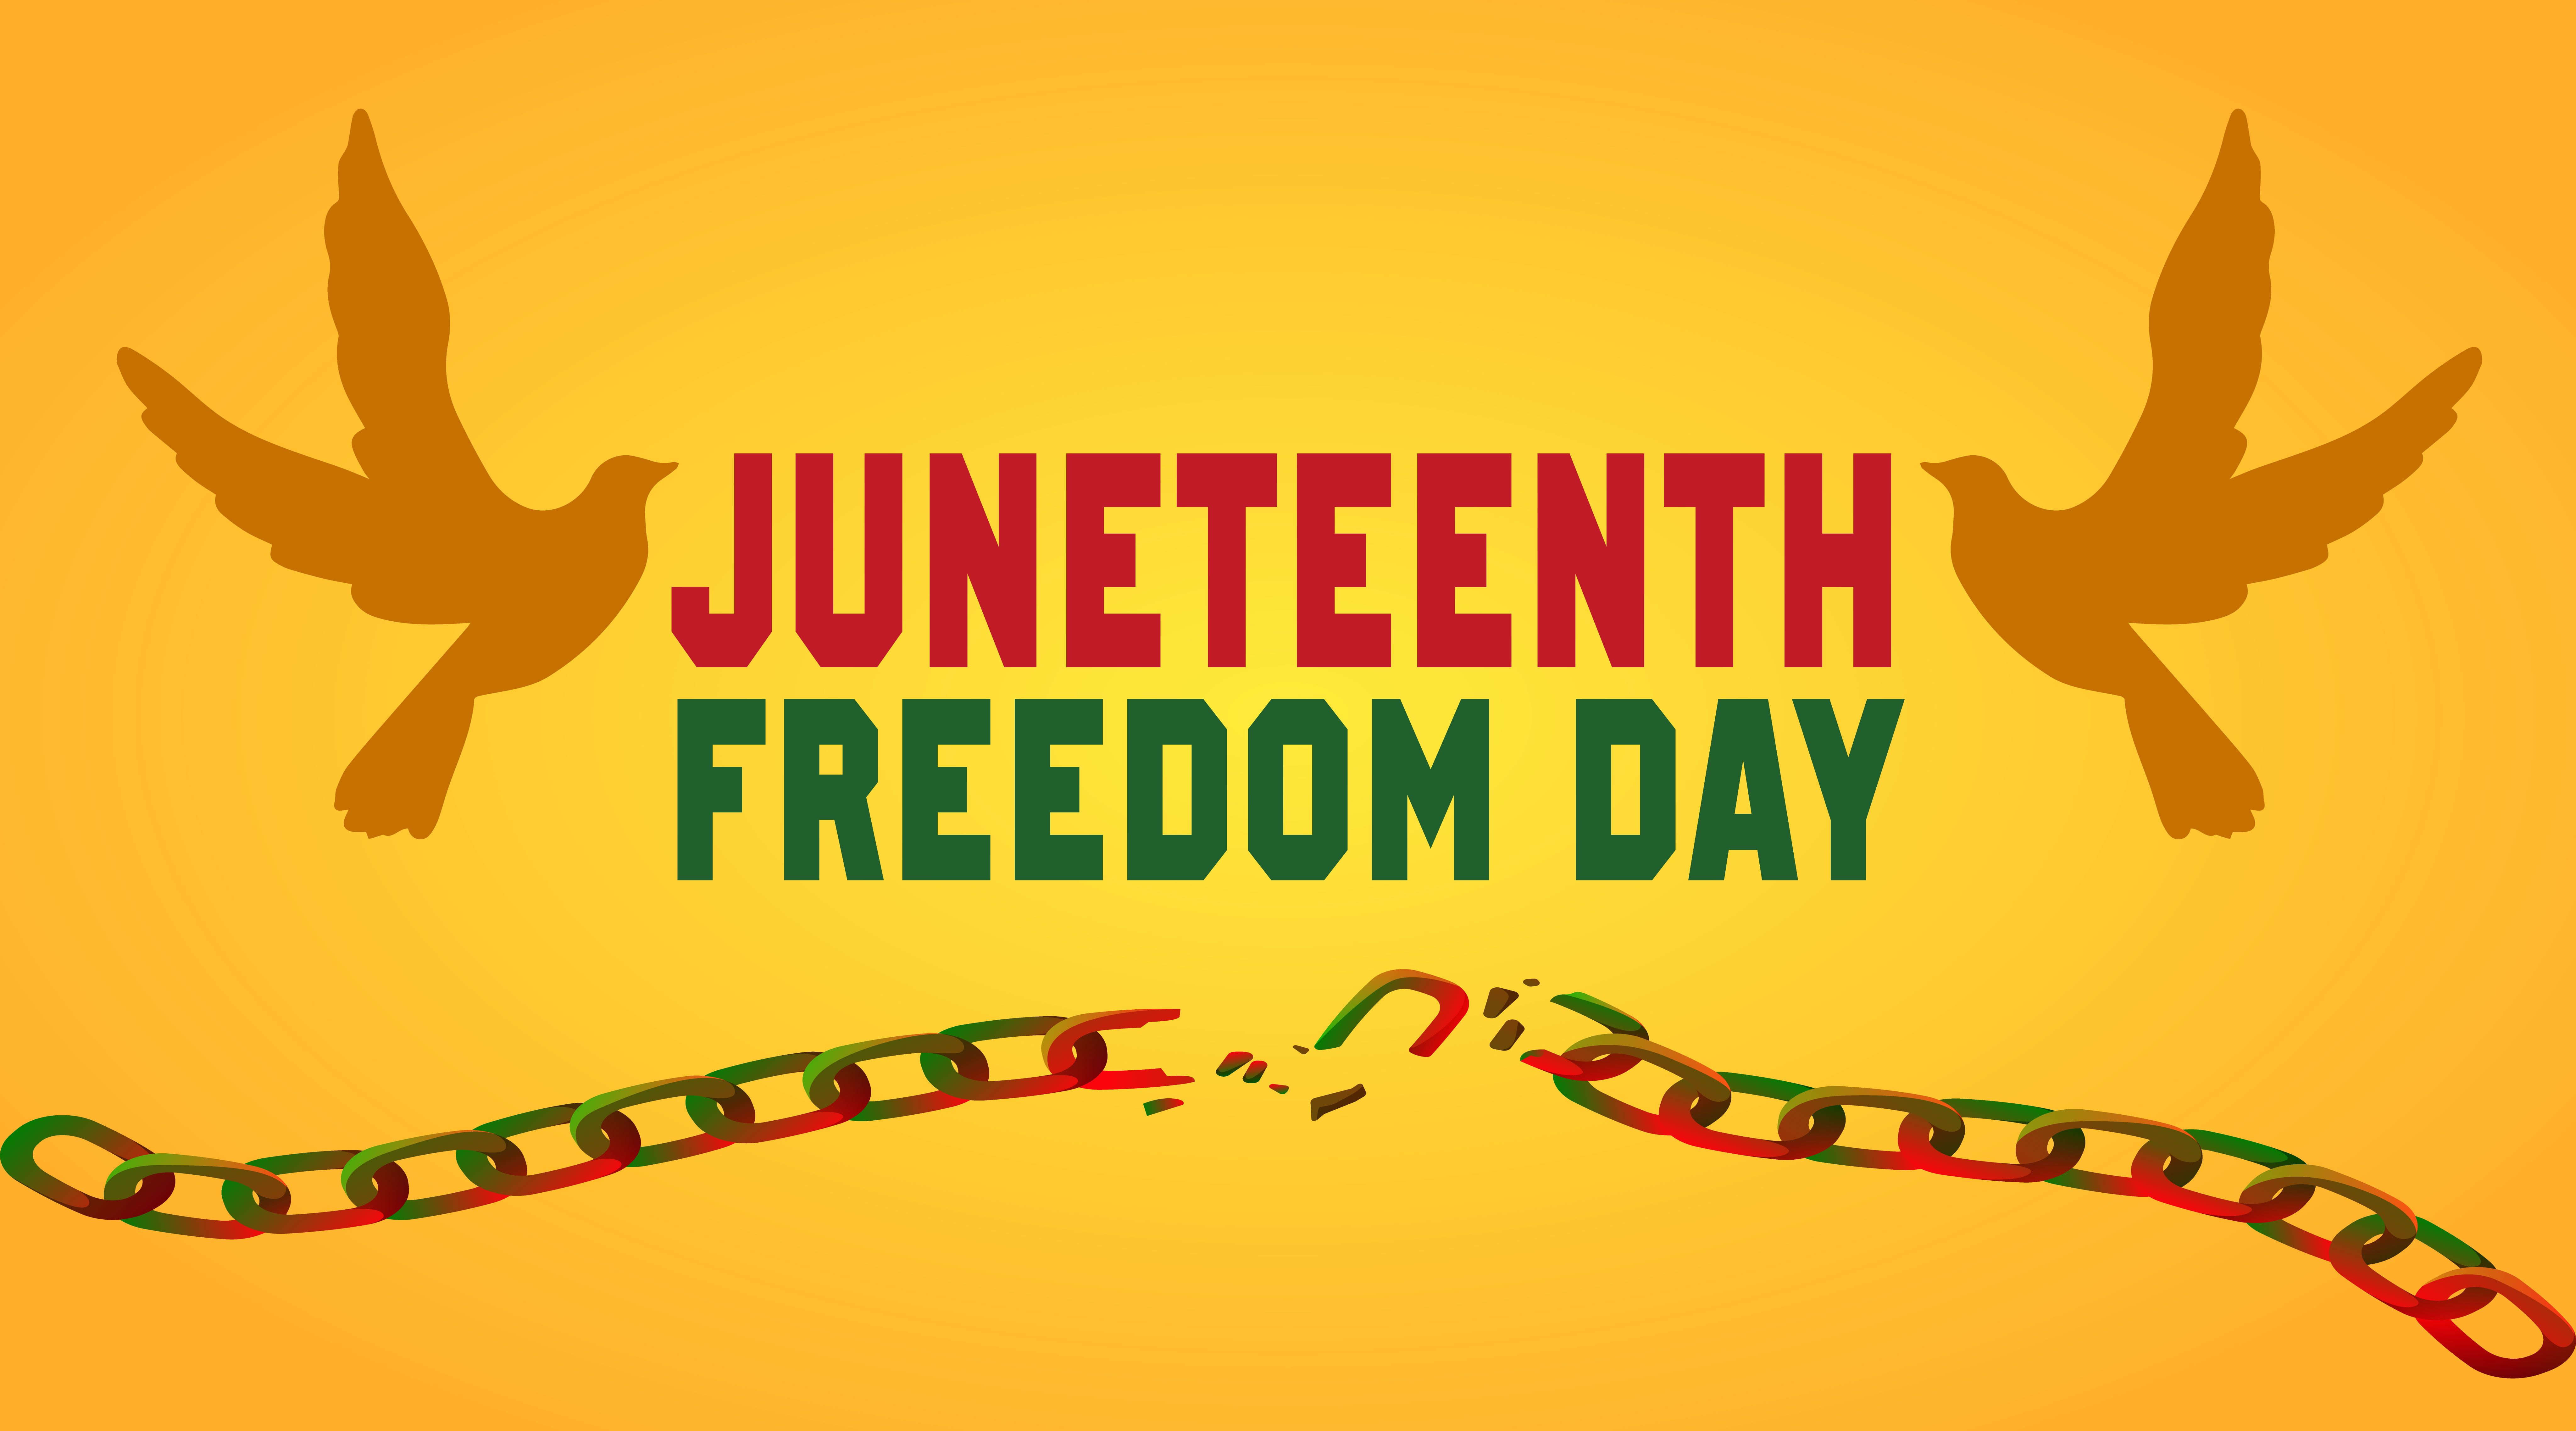 Juneteenth Freedom Day with a broken chain and two doves